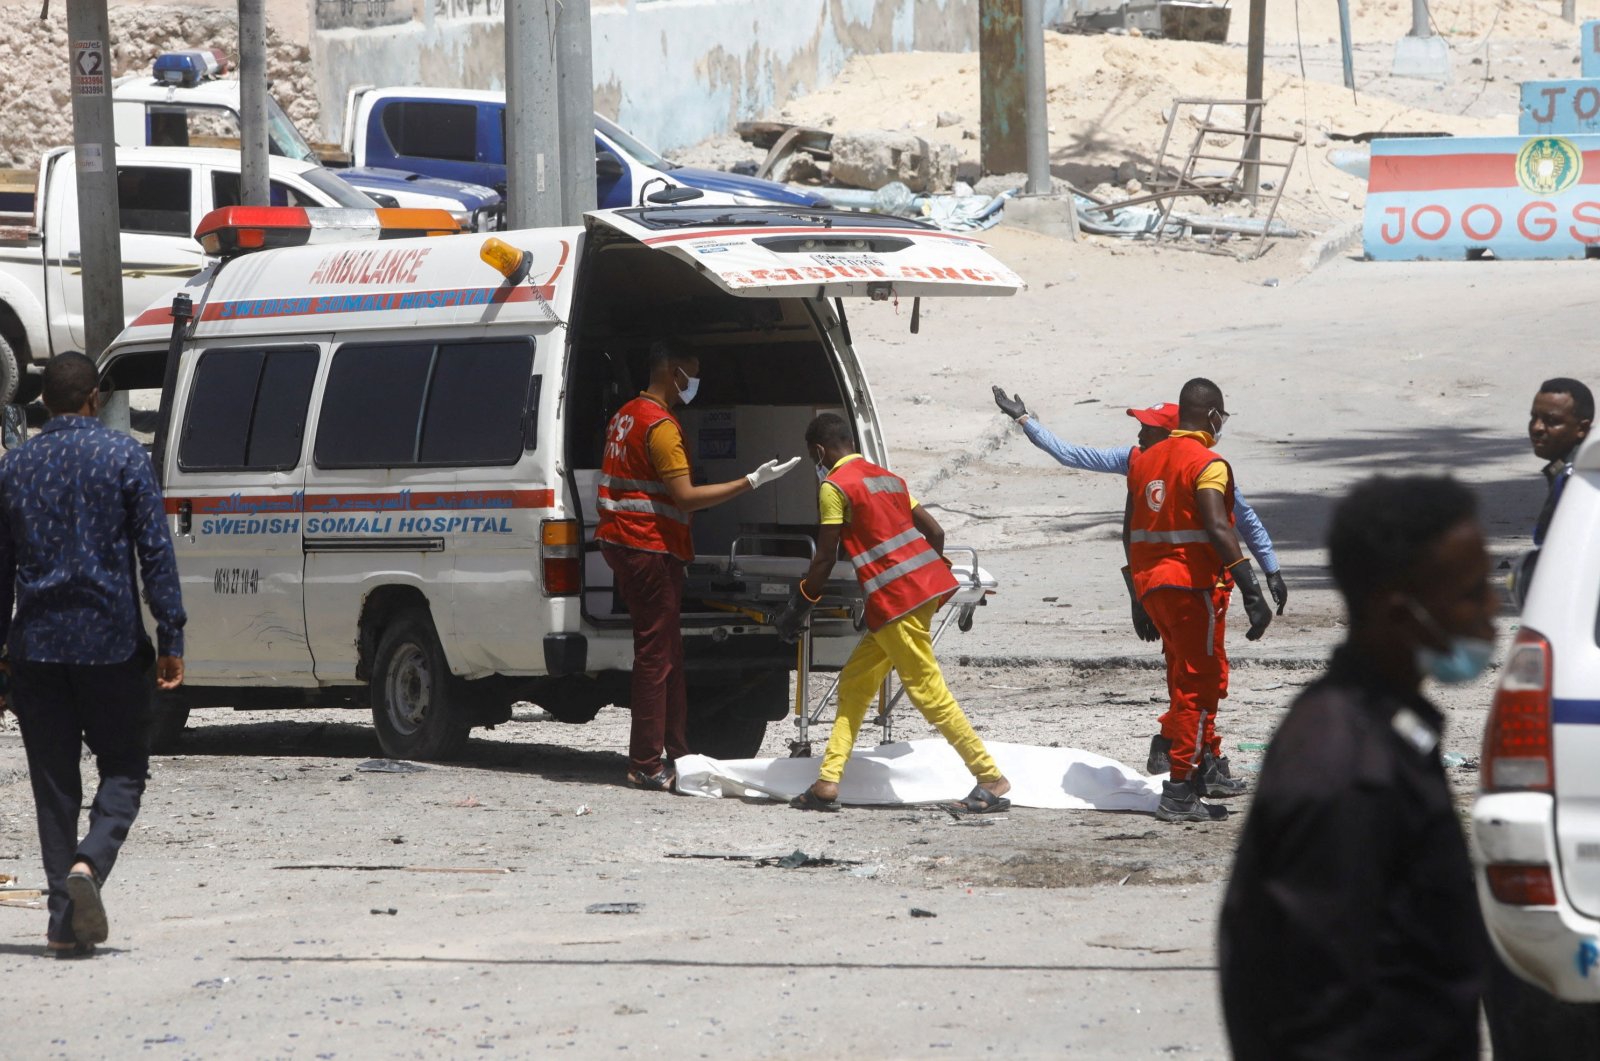 Paramedics prepare to transport the body of an unidentified man killed in an explosion at a checkpoint near the presidential palace in Mogadishu, Somalia, Feb. 10, 2022. (Reuters Photo)